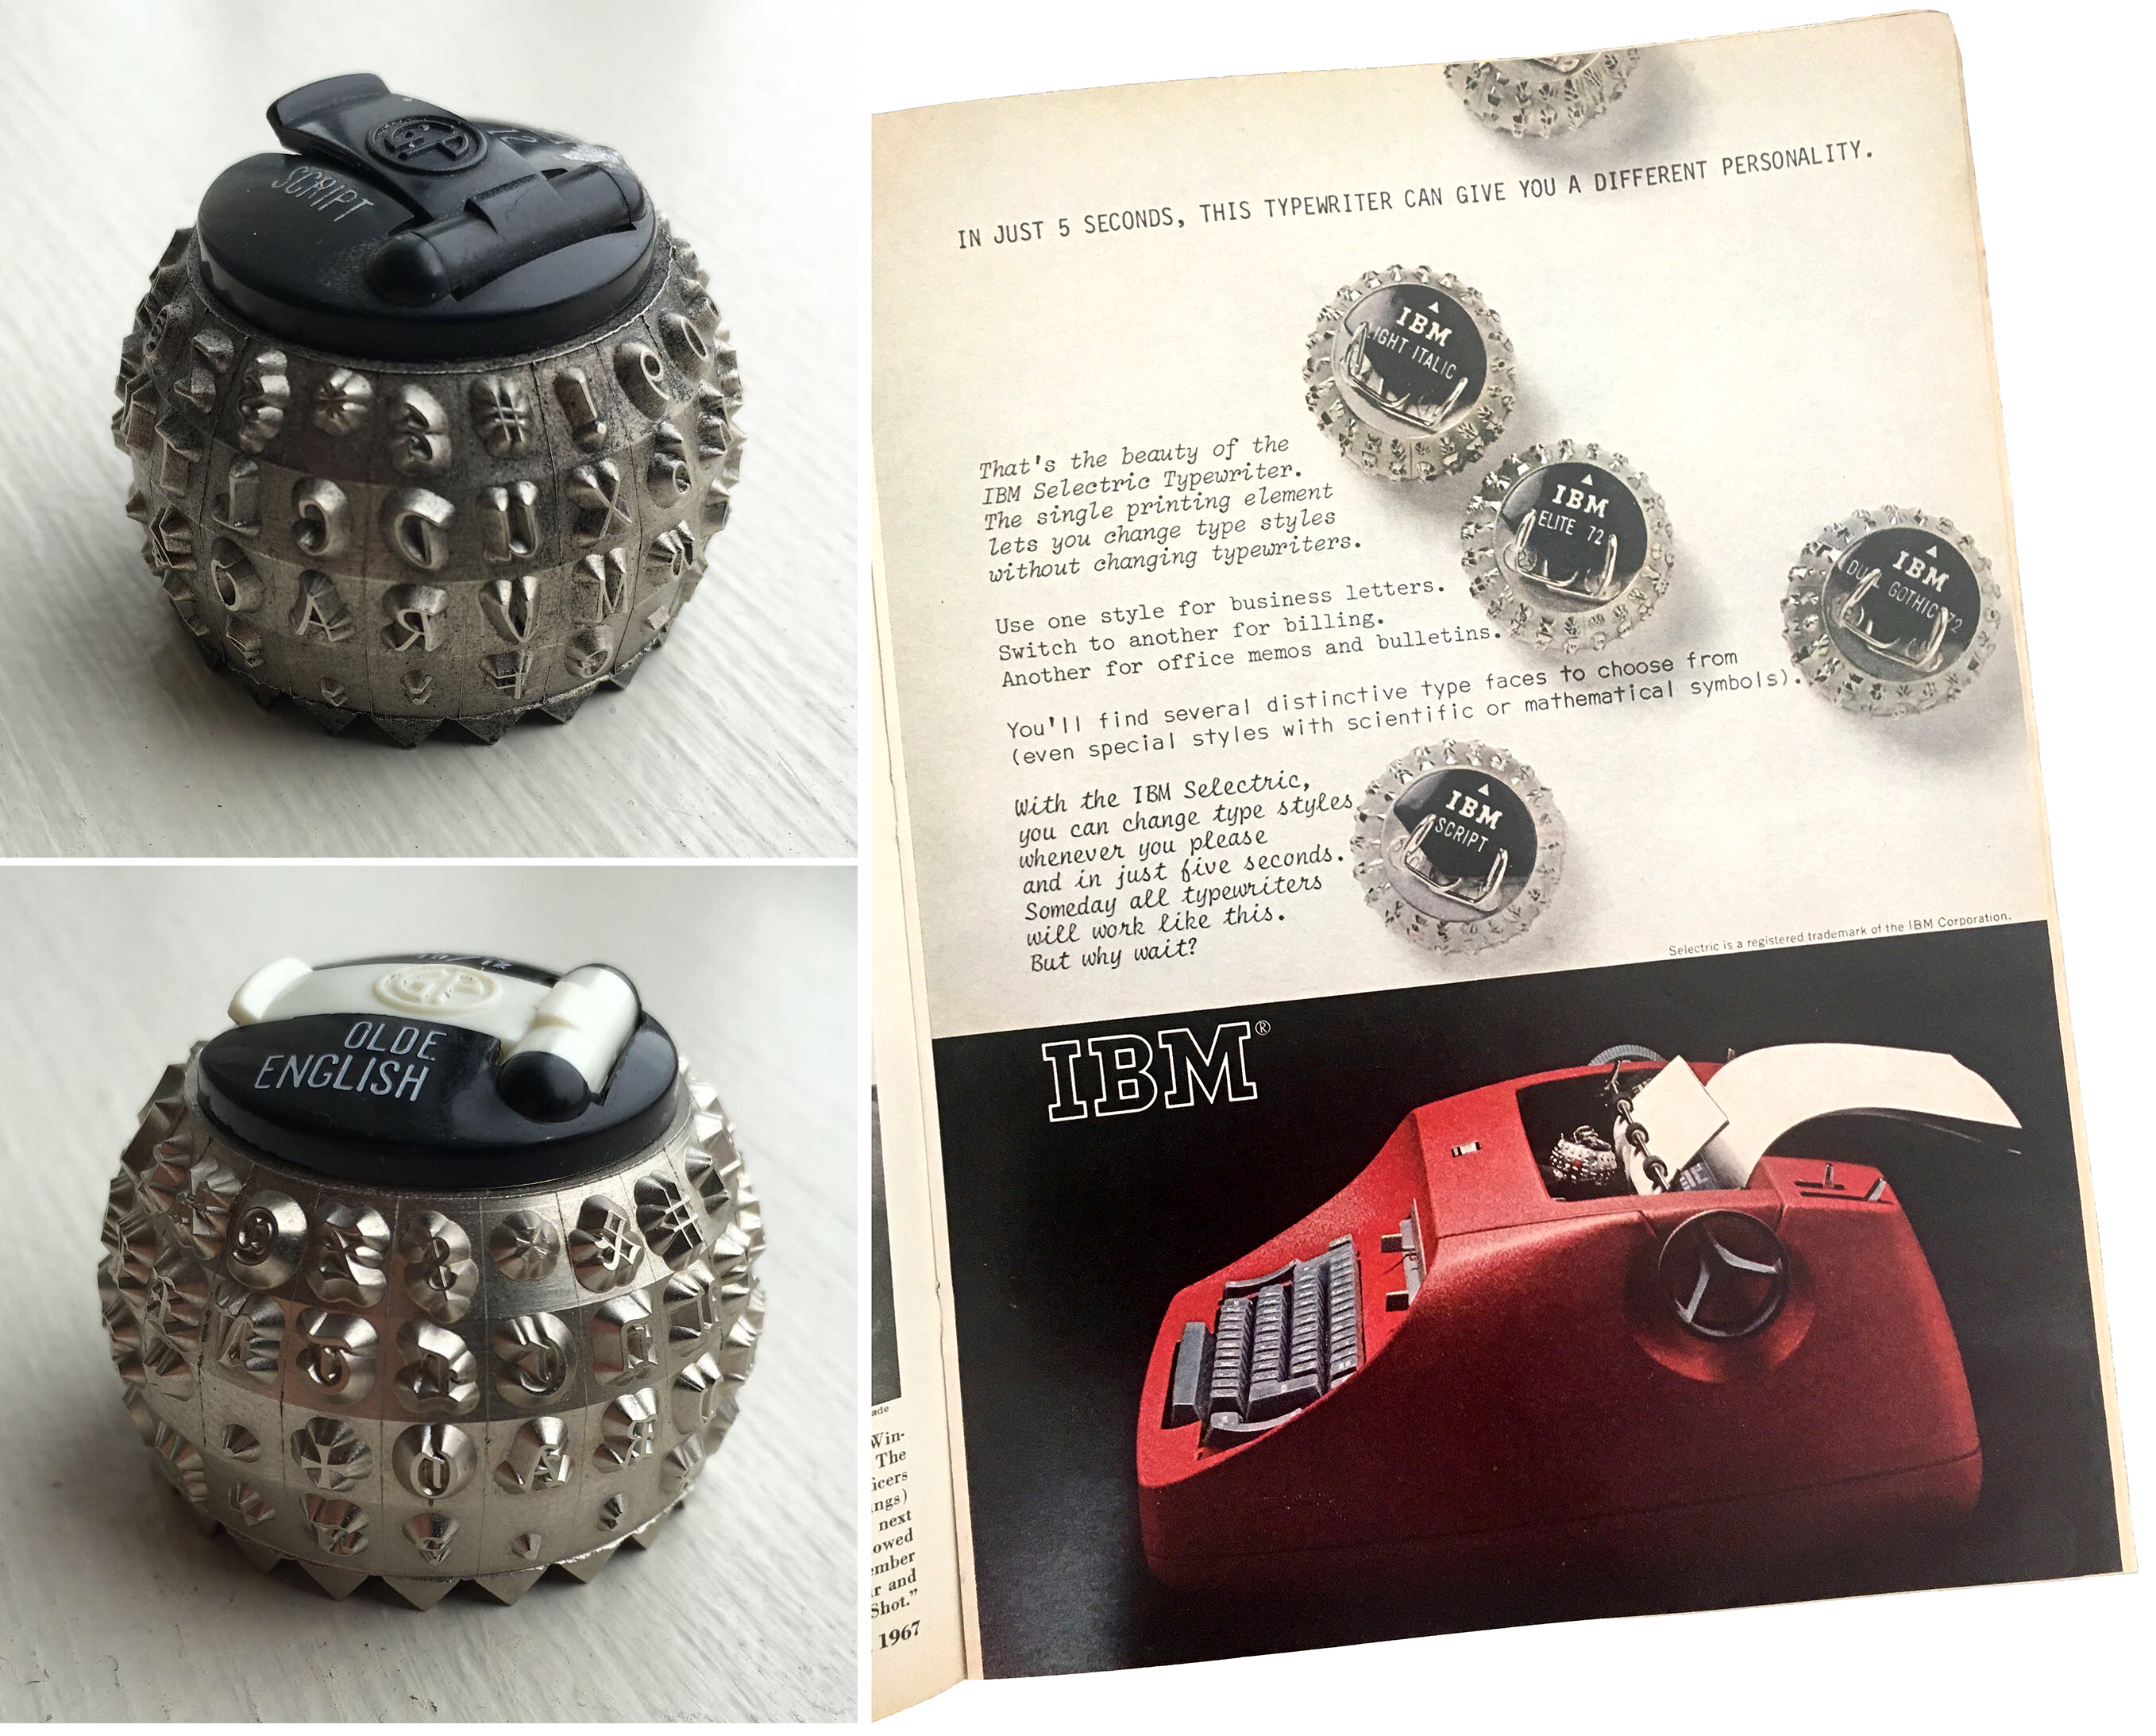 IBM Selectric font elements and ad